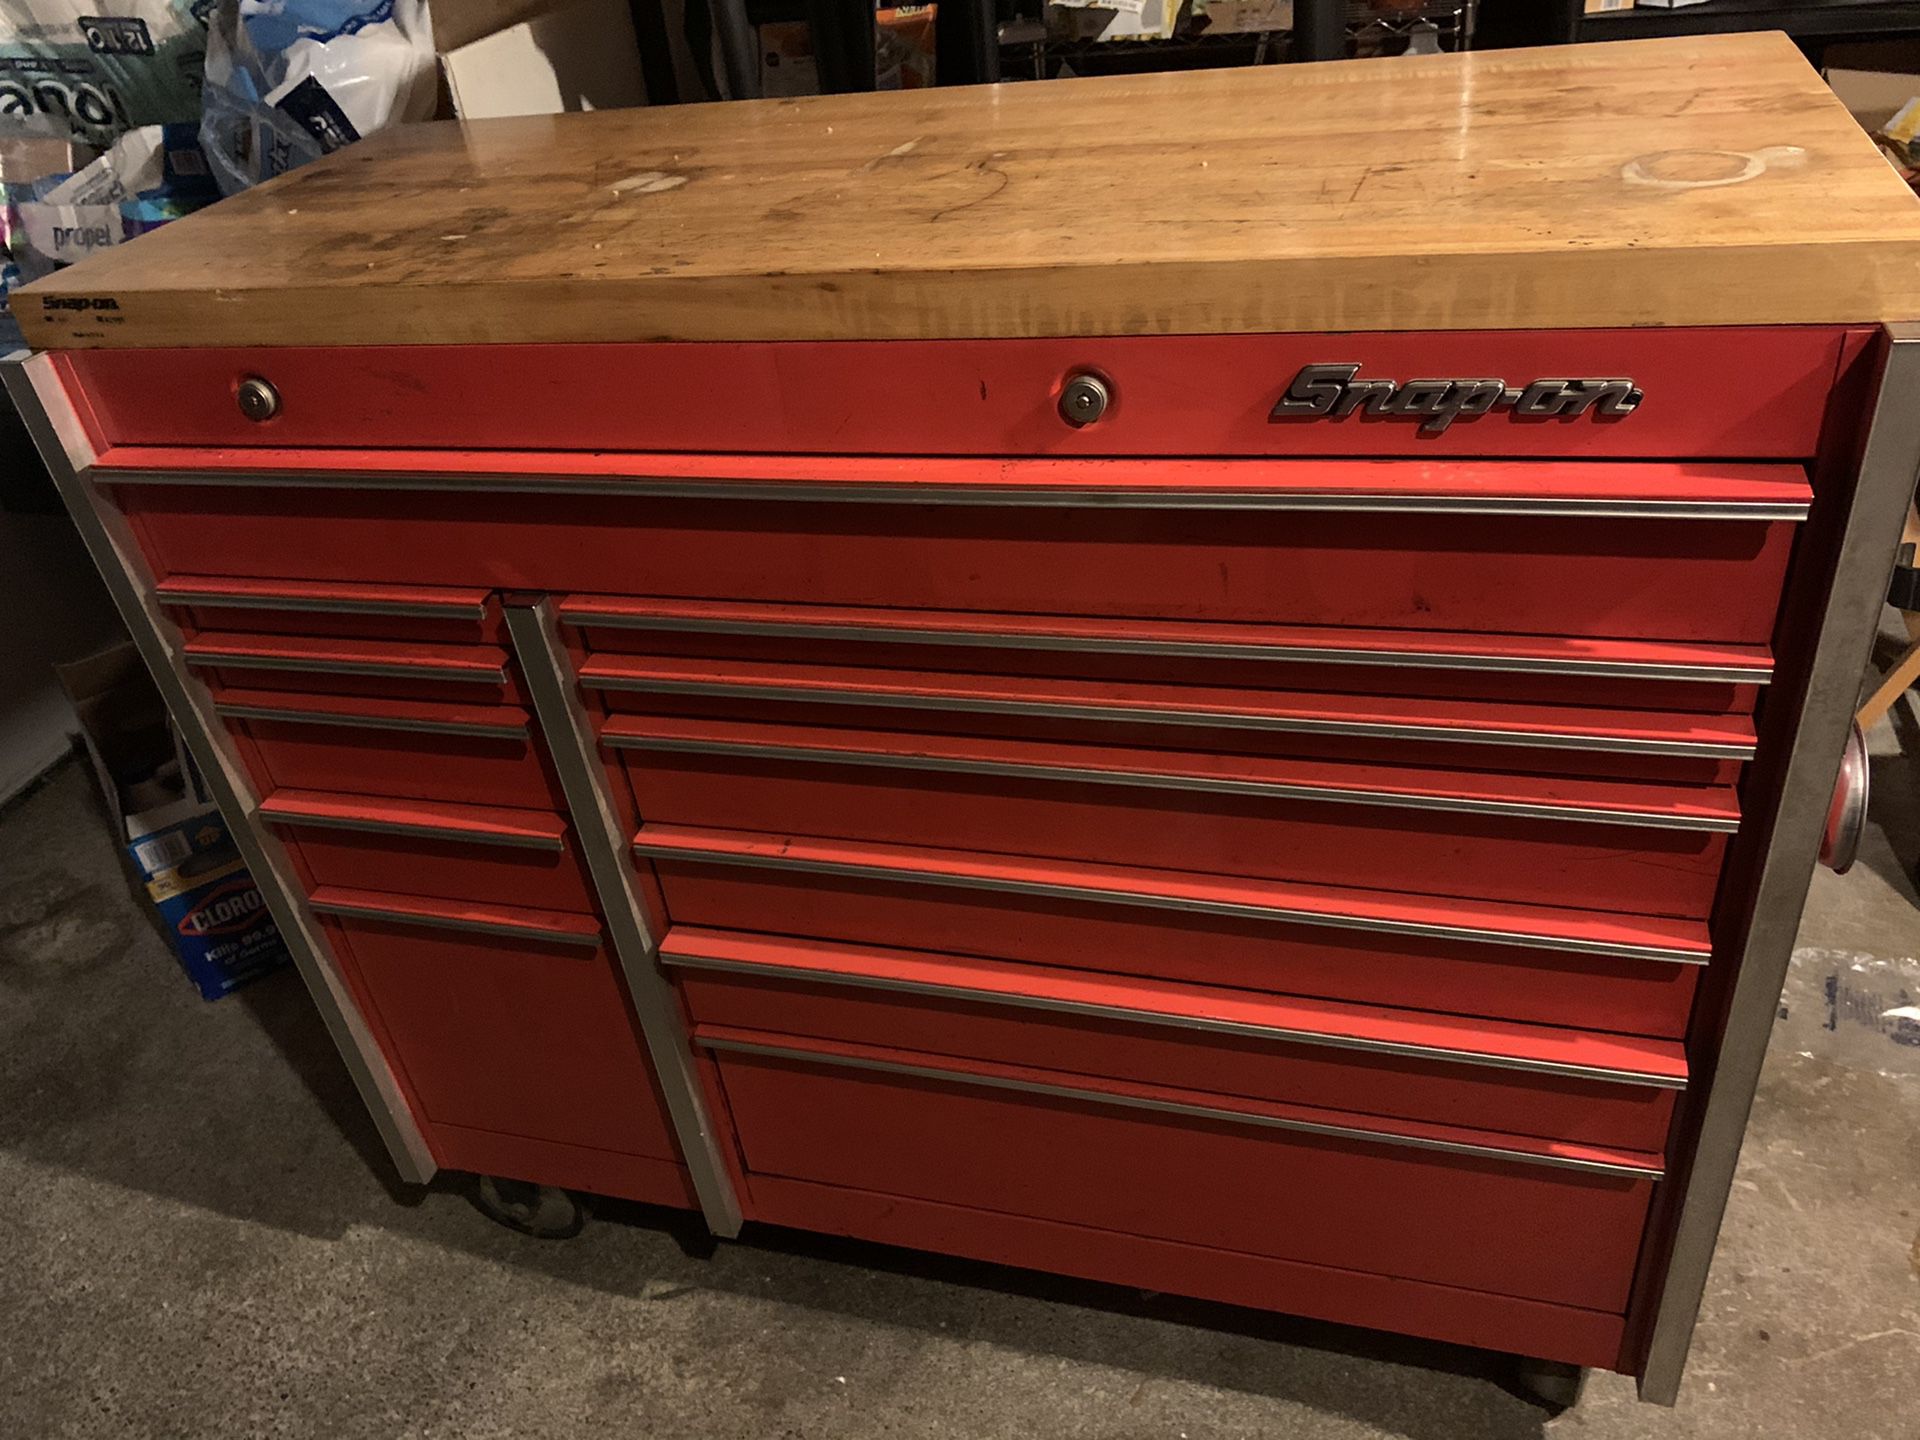 Snap On KR661 tool box with wood top